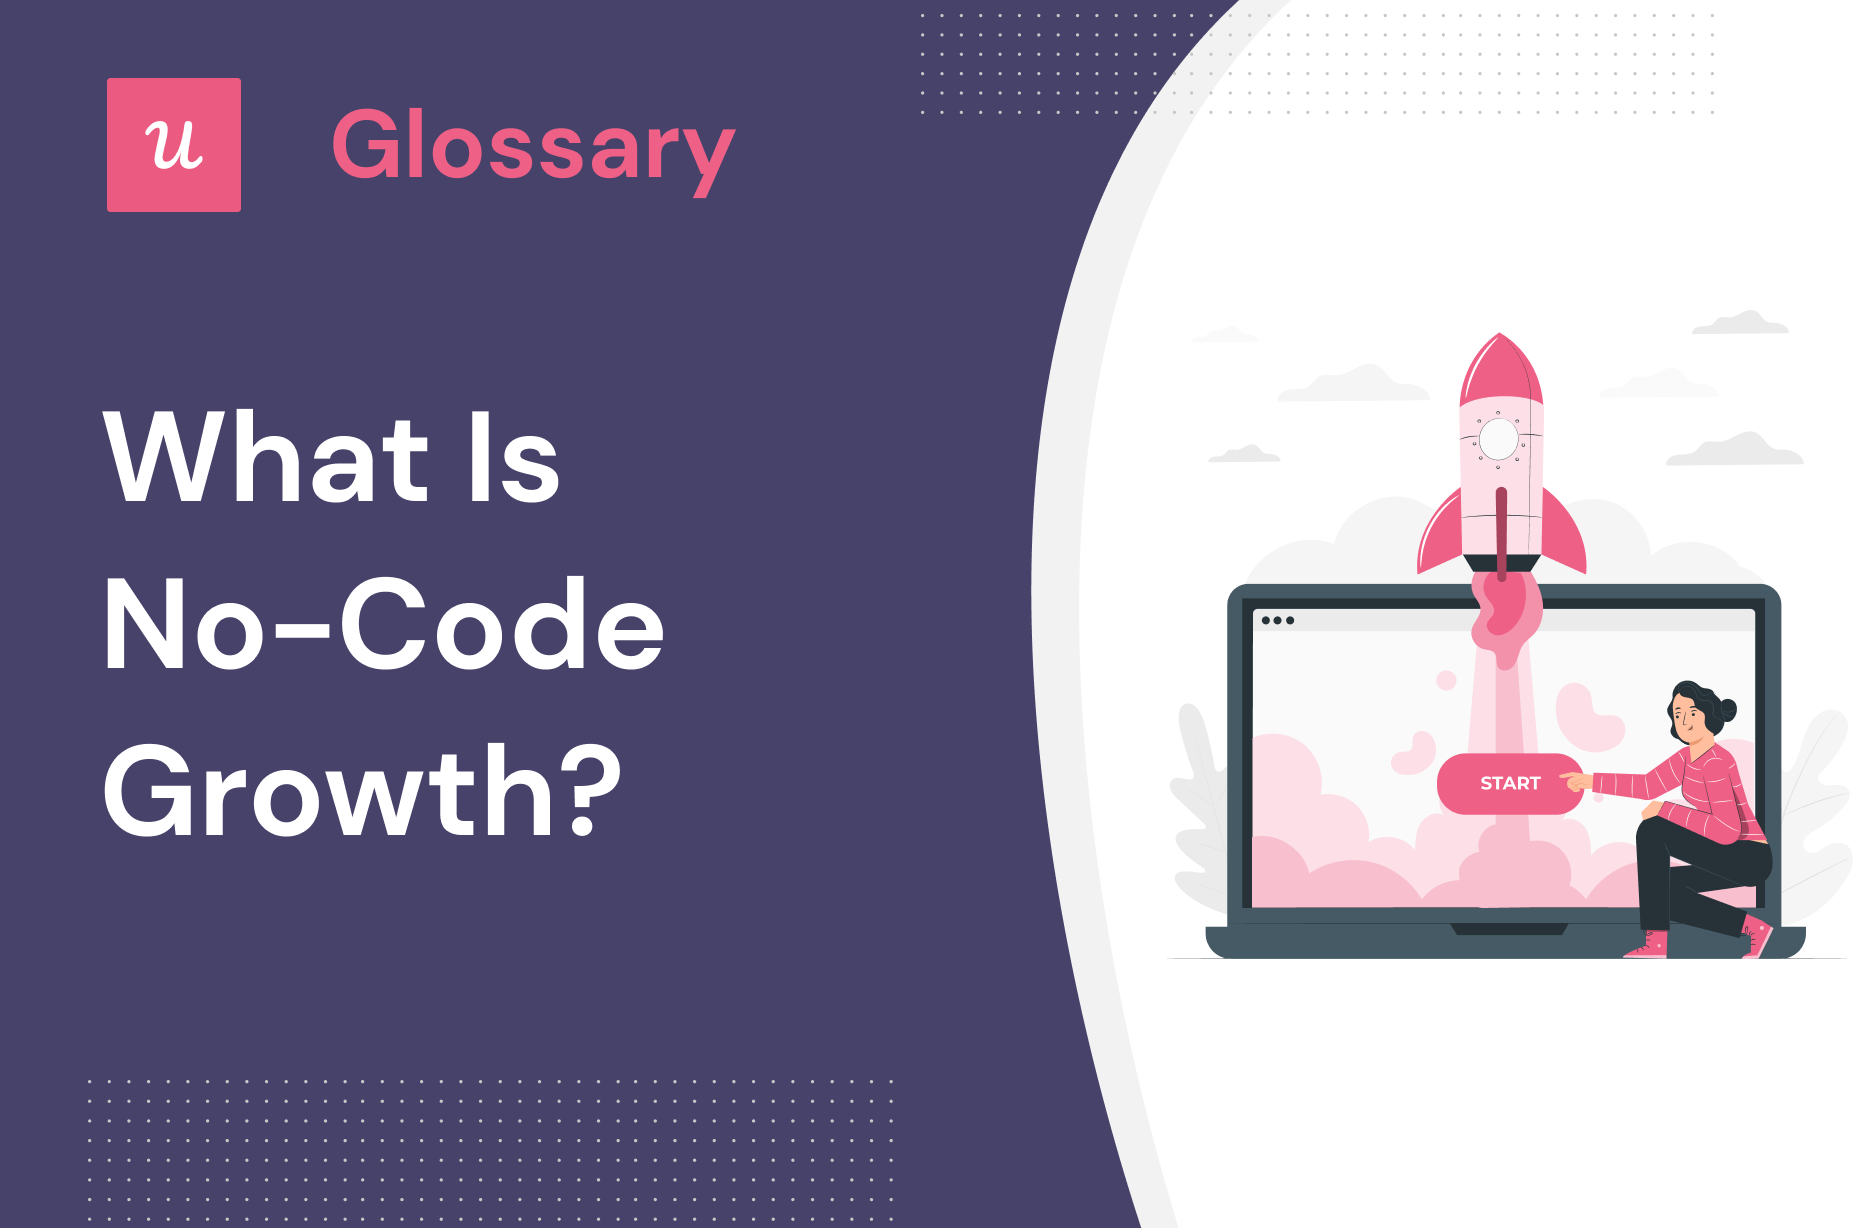 What is No-Code Growth?